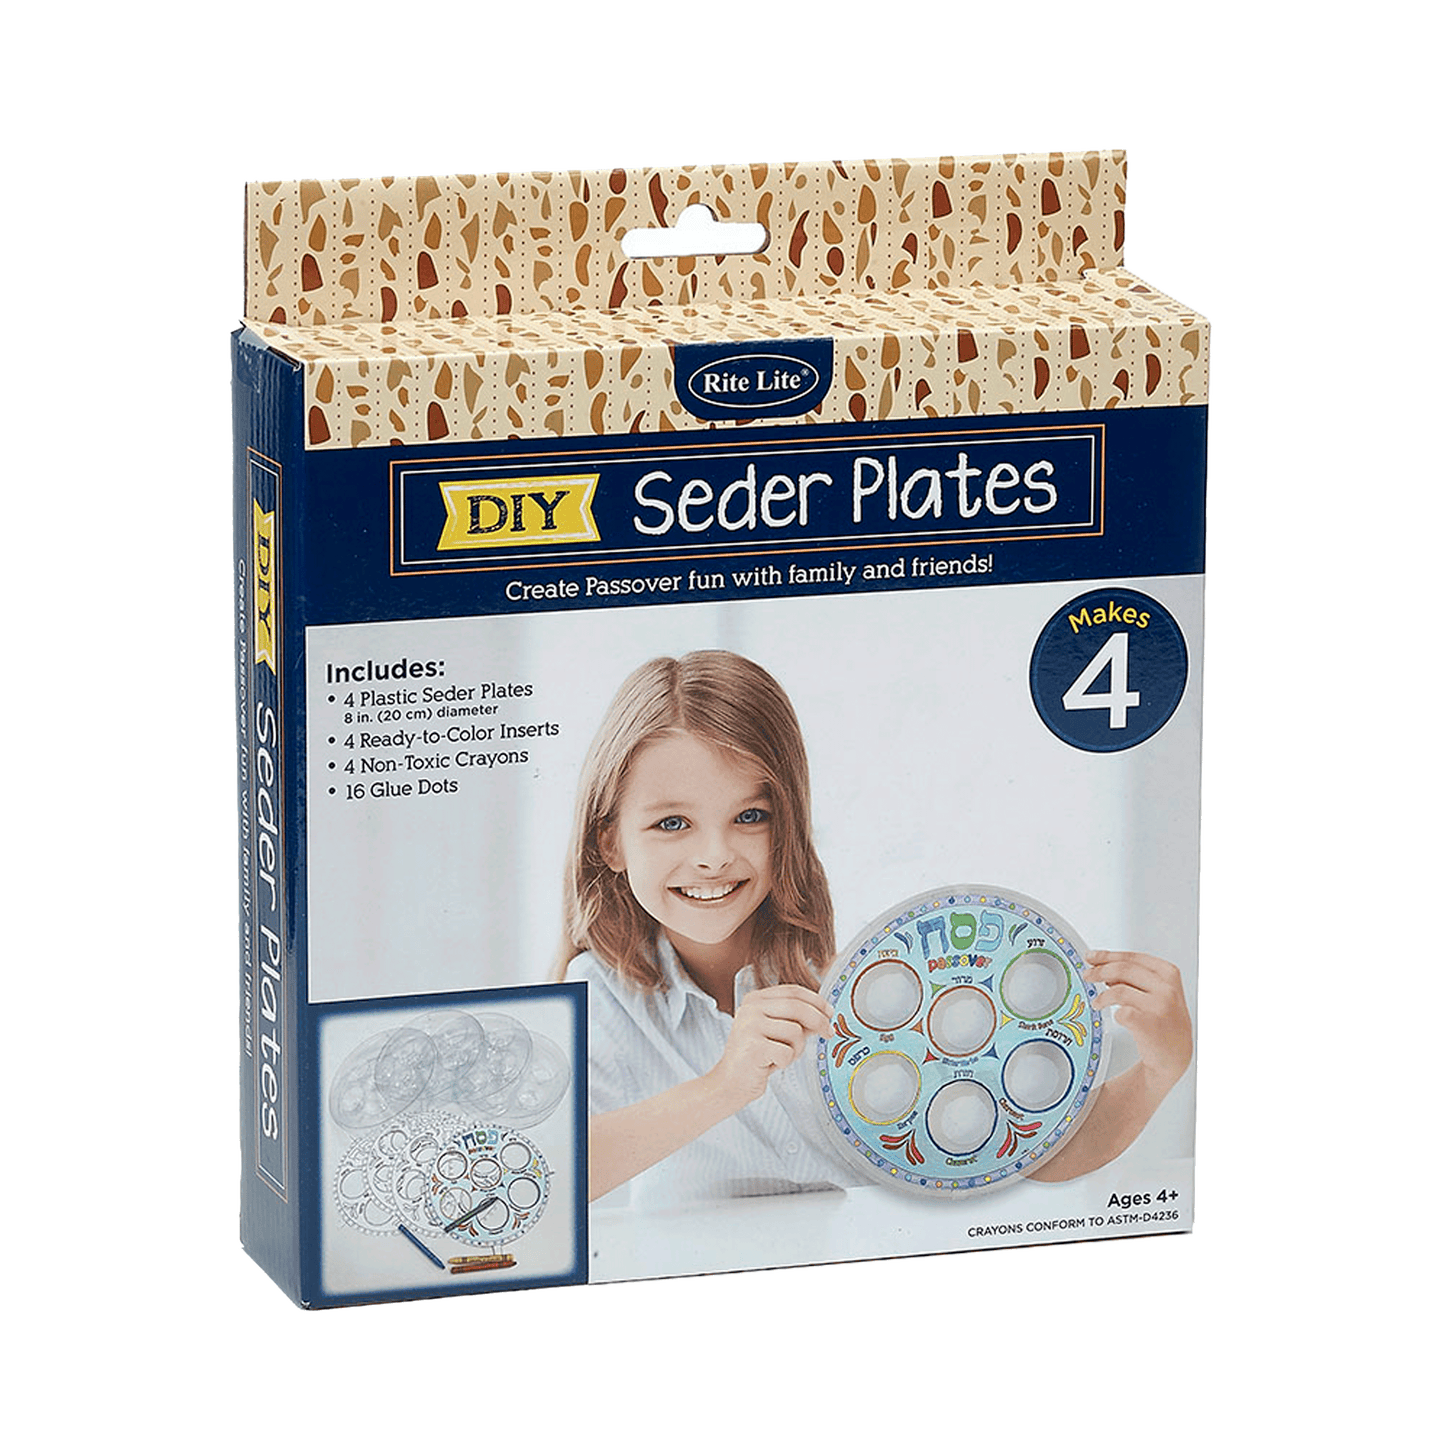 Rite Lite DIY Seder Plates with little girl holding her own seder plate